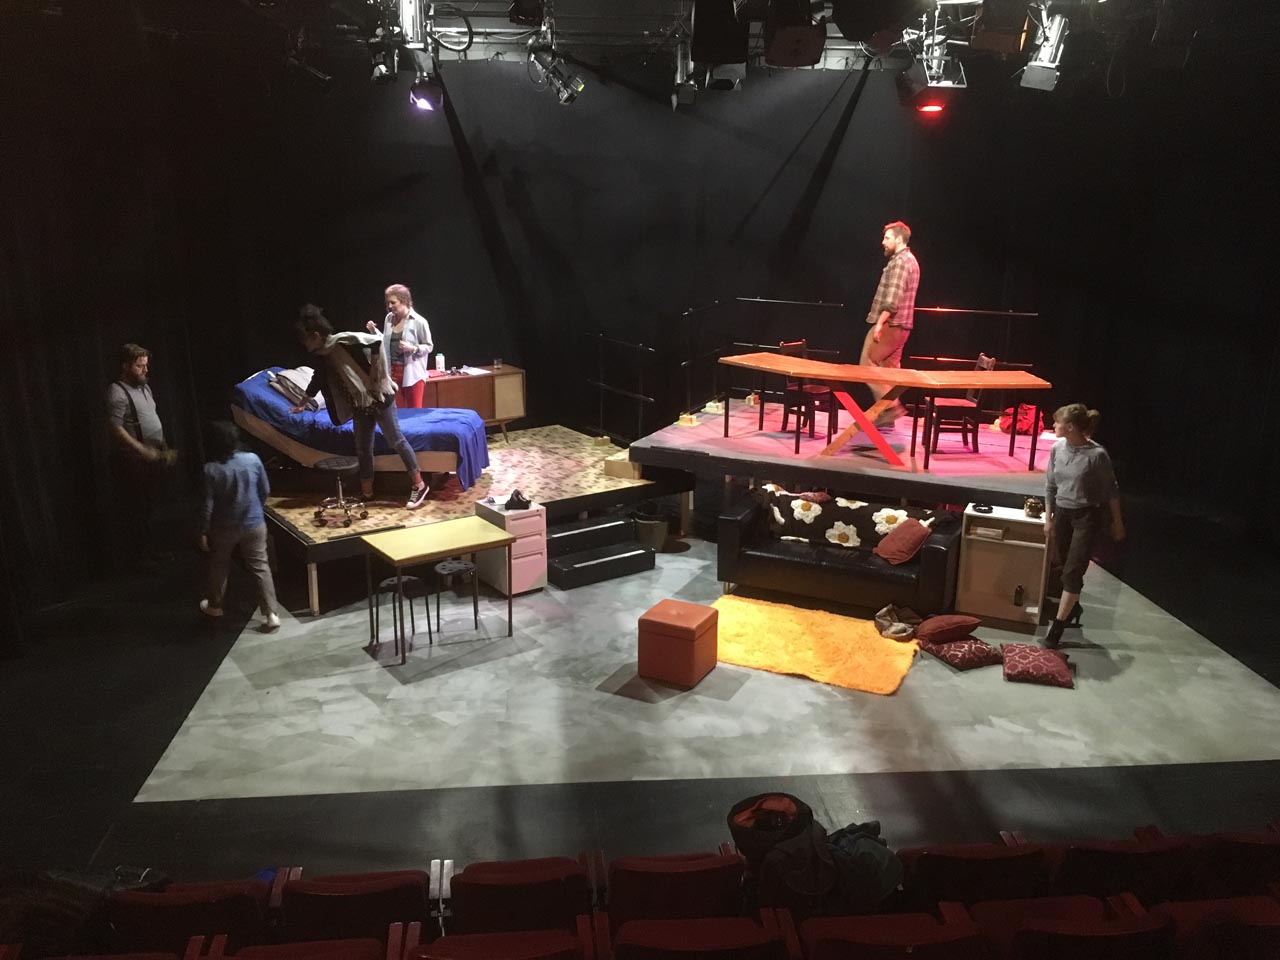 TACTICS Omnibus Bill BTS – from the 2019 production of The Omnibus Bill by Darrah Teitel, directed by Esther Jun